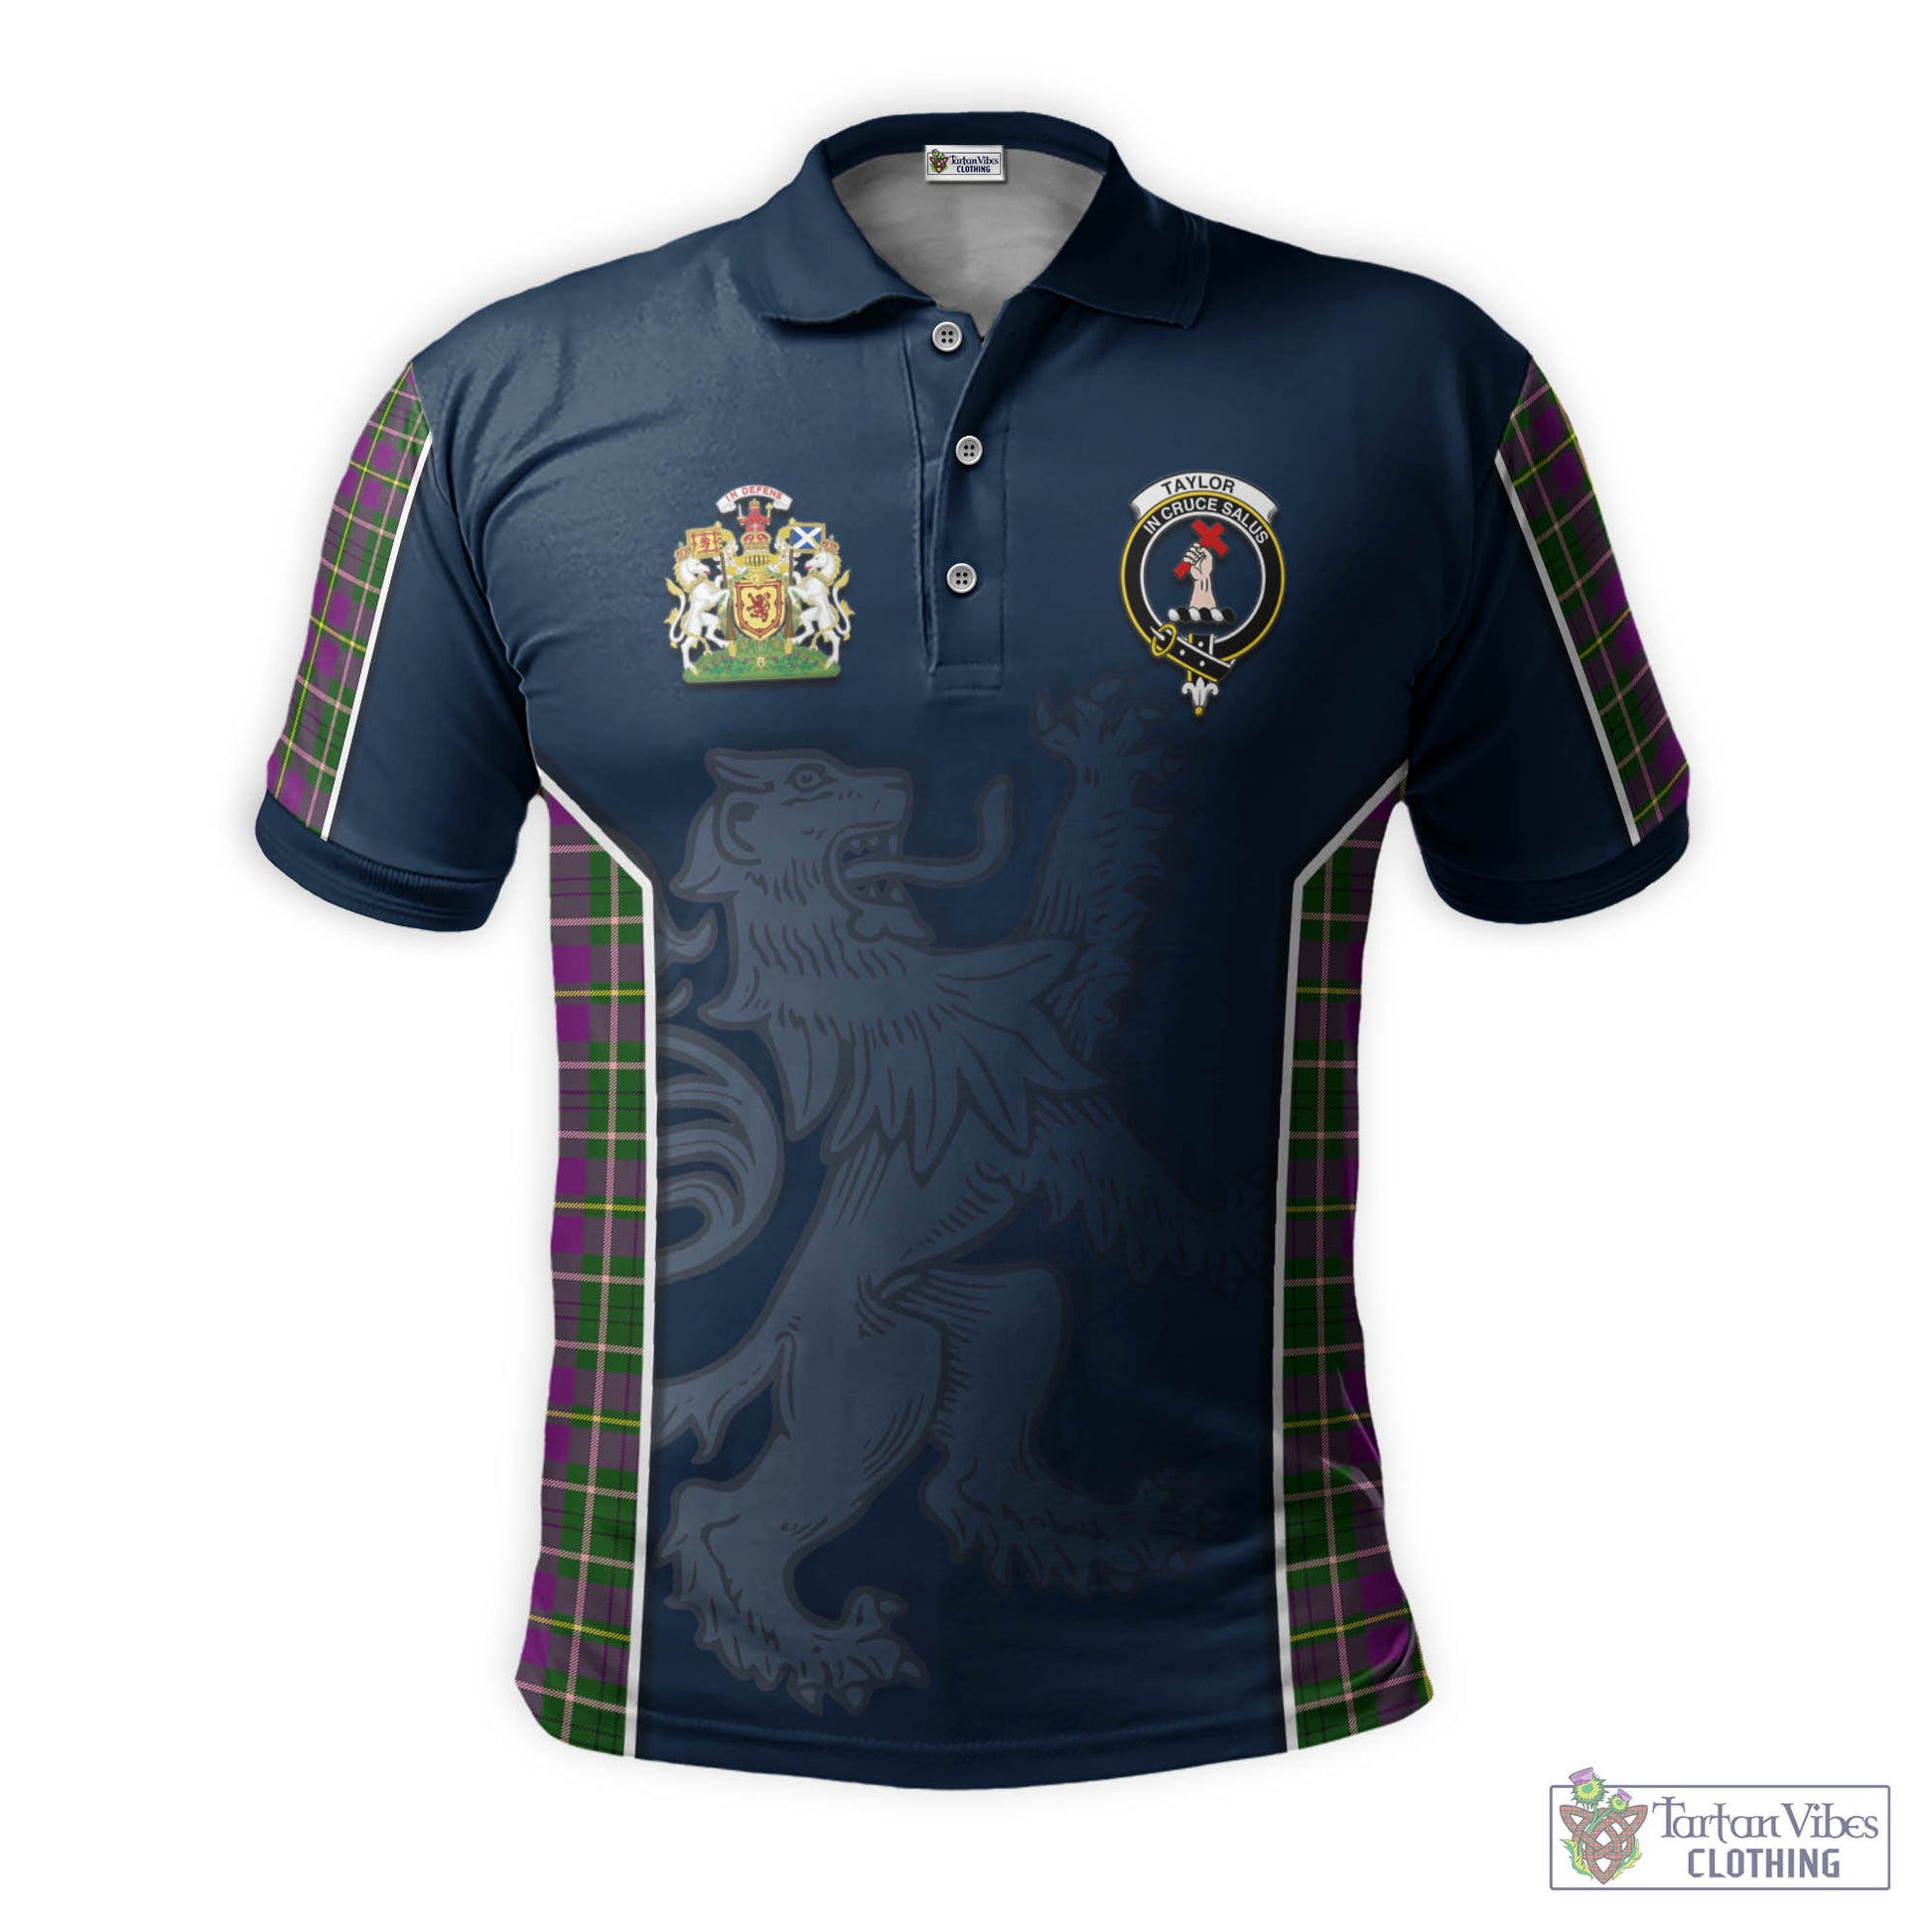 Tartan Vibes Clothing Taylor Tartan Men's Polo Shirt with Family Crest and Lion Rampant Vibes Sport Style